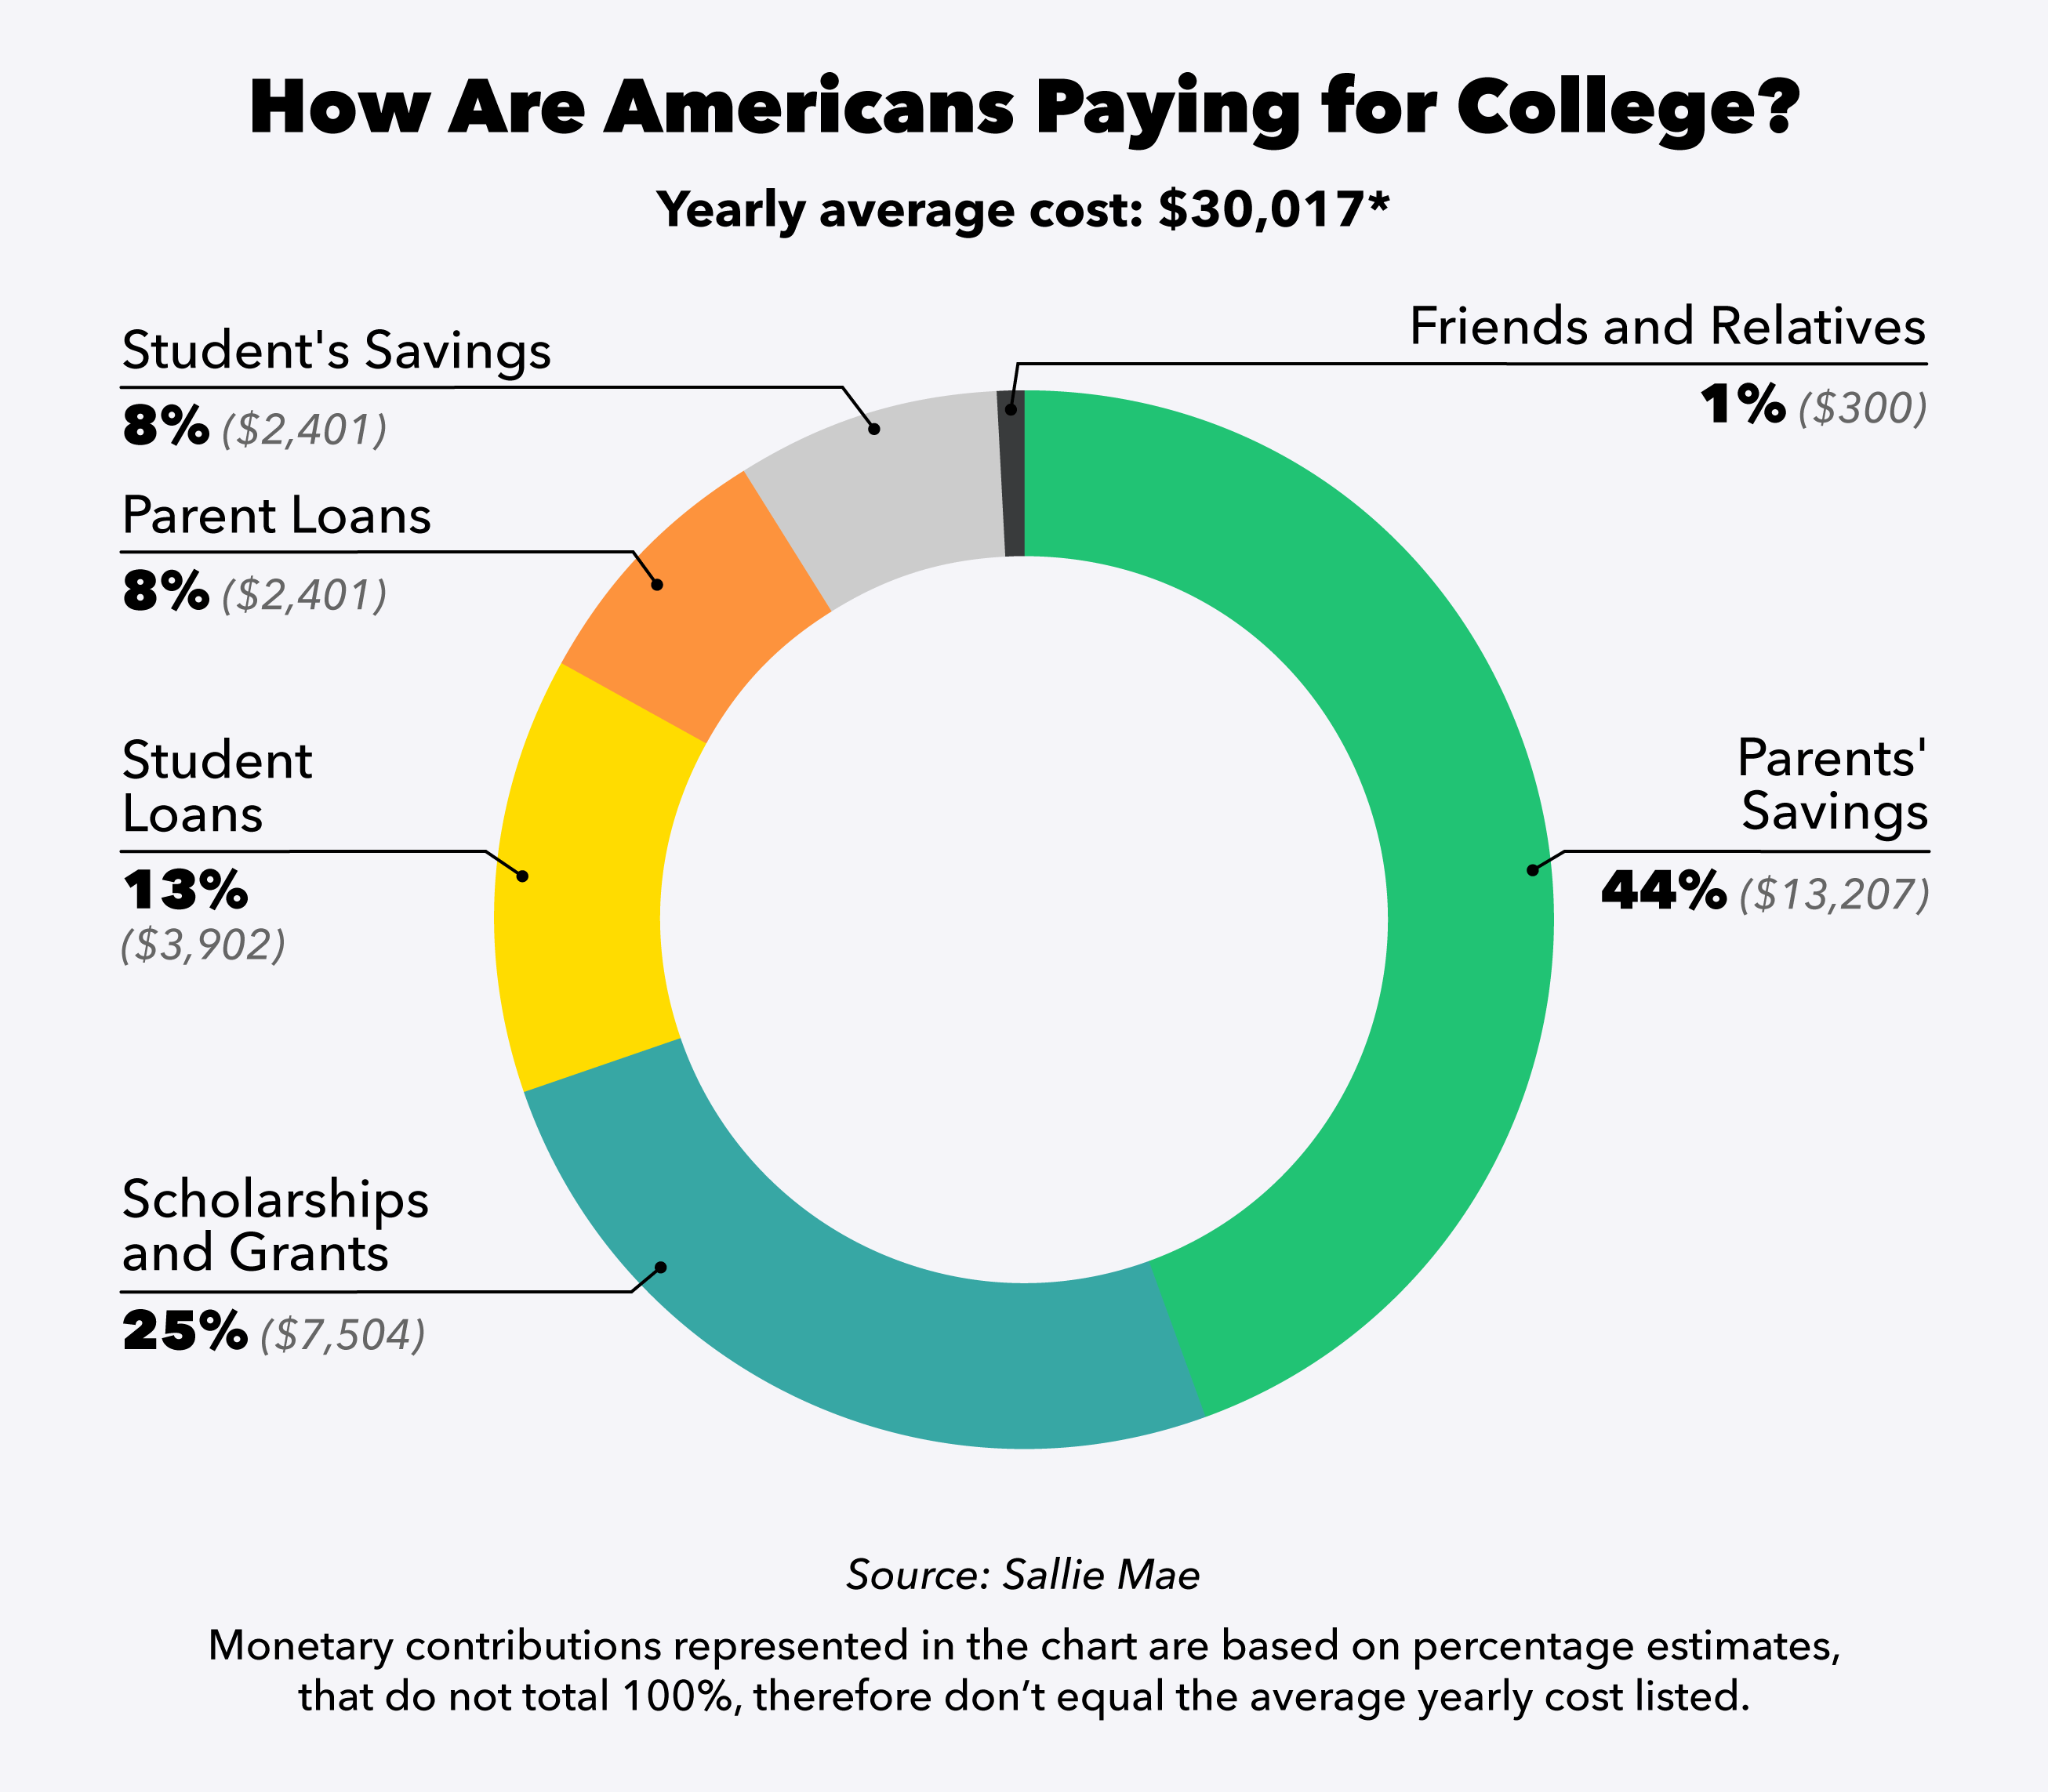 Pie chart comparing who pays for college education. 44%, the majority, is paid through parent savings. 